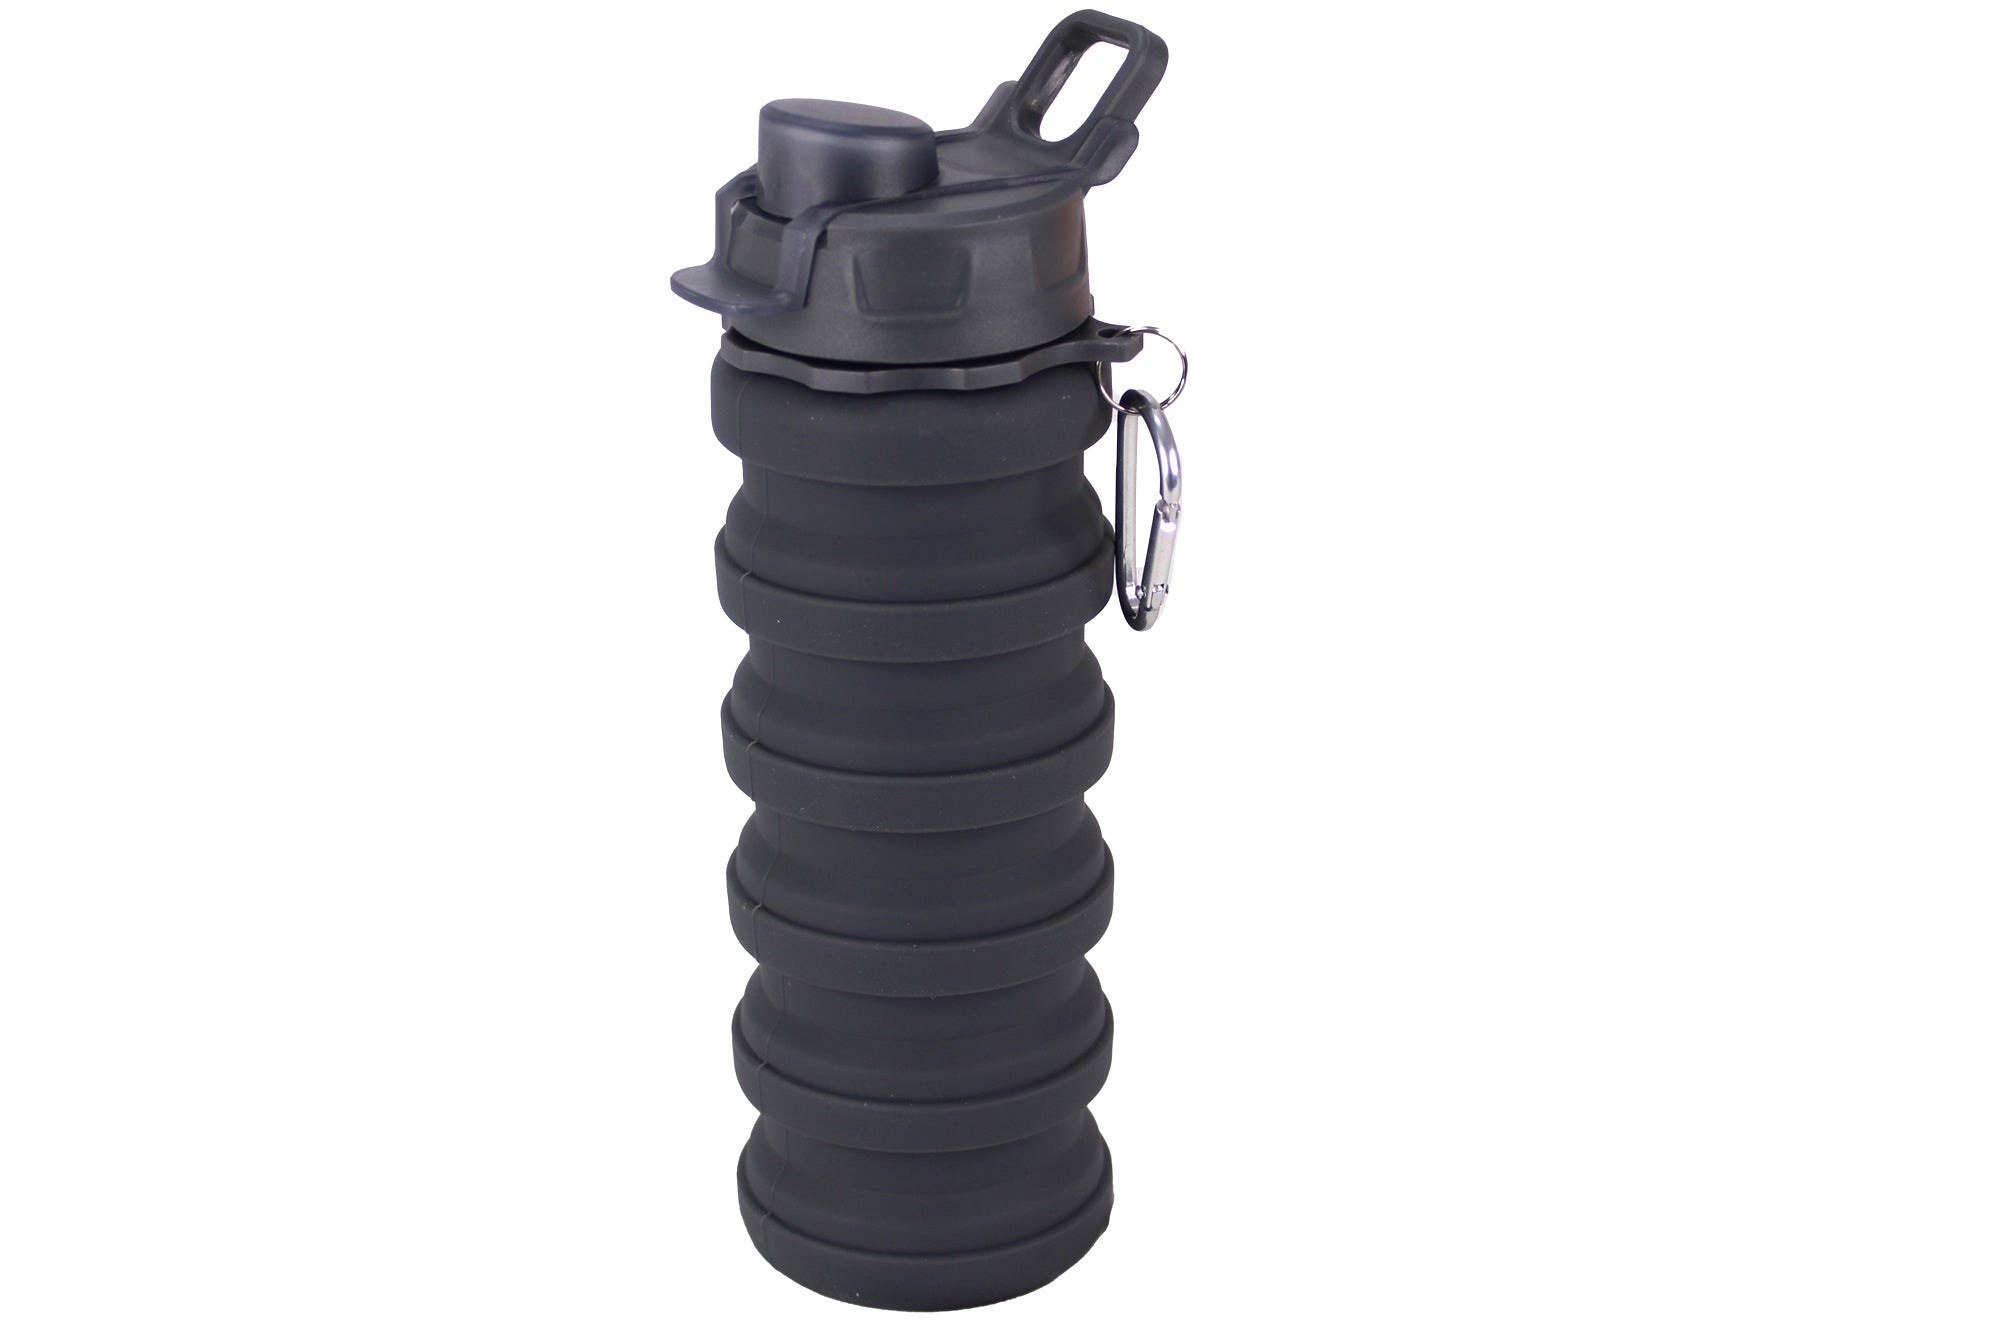 Collapsable Grenade Water Bottle: Fire Water in the Hole!